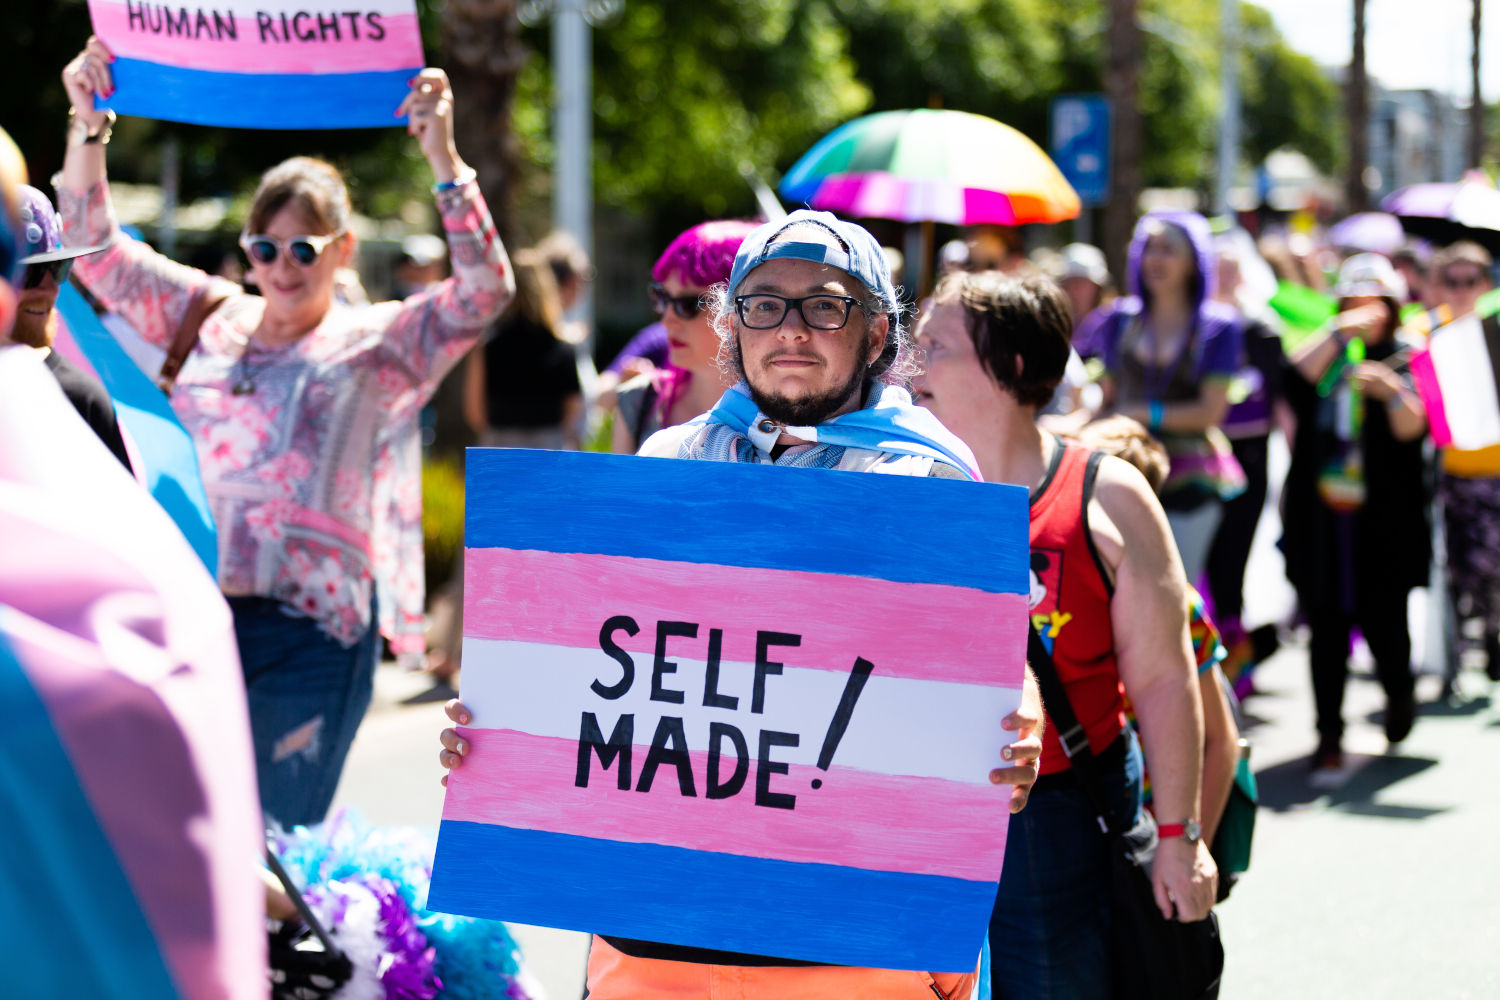 People marching at Pride March. The first person is holding a banner: "Self made!"